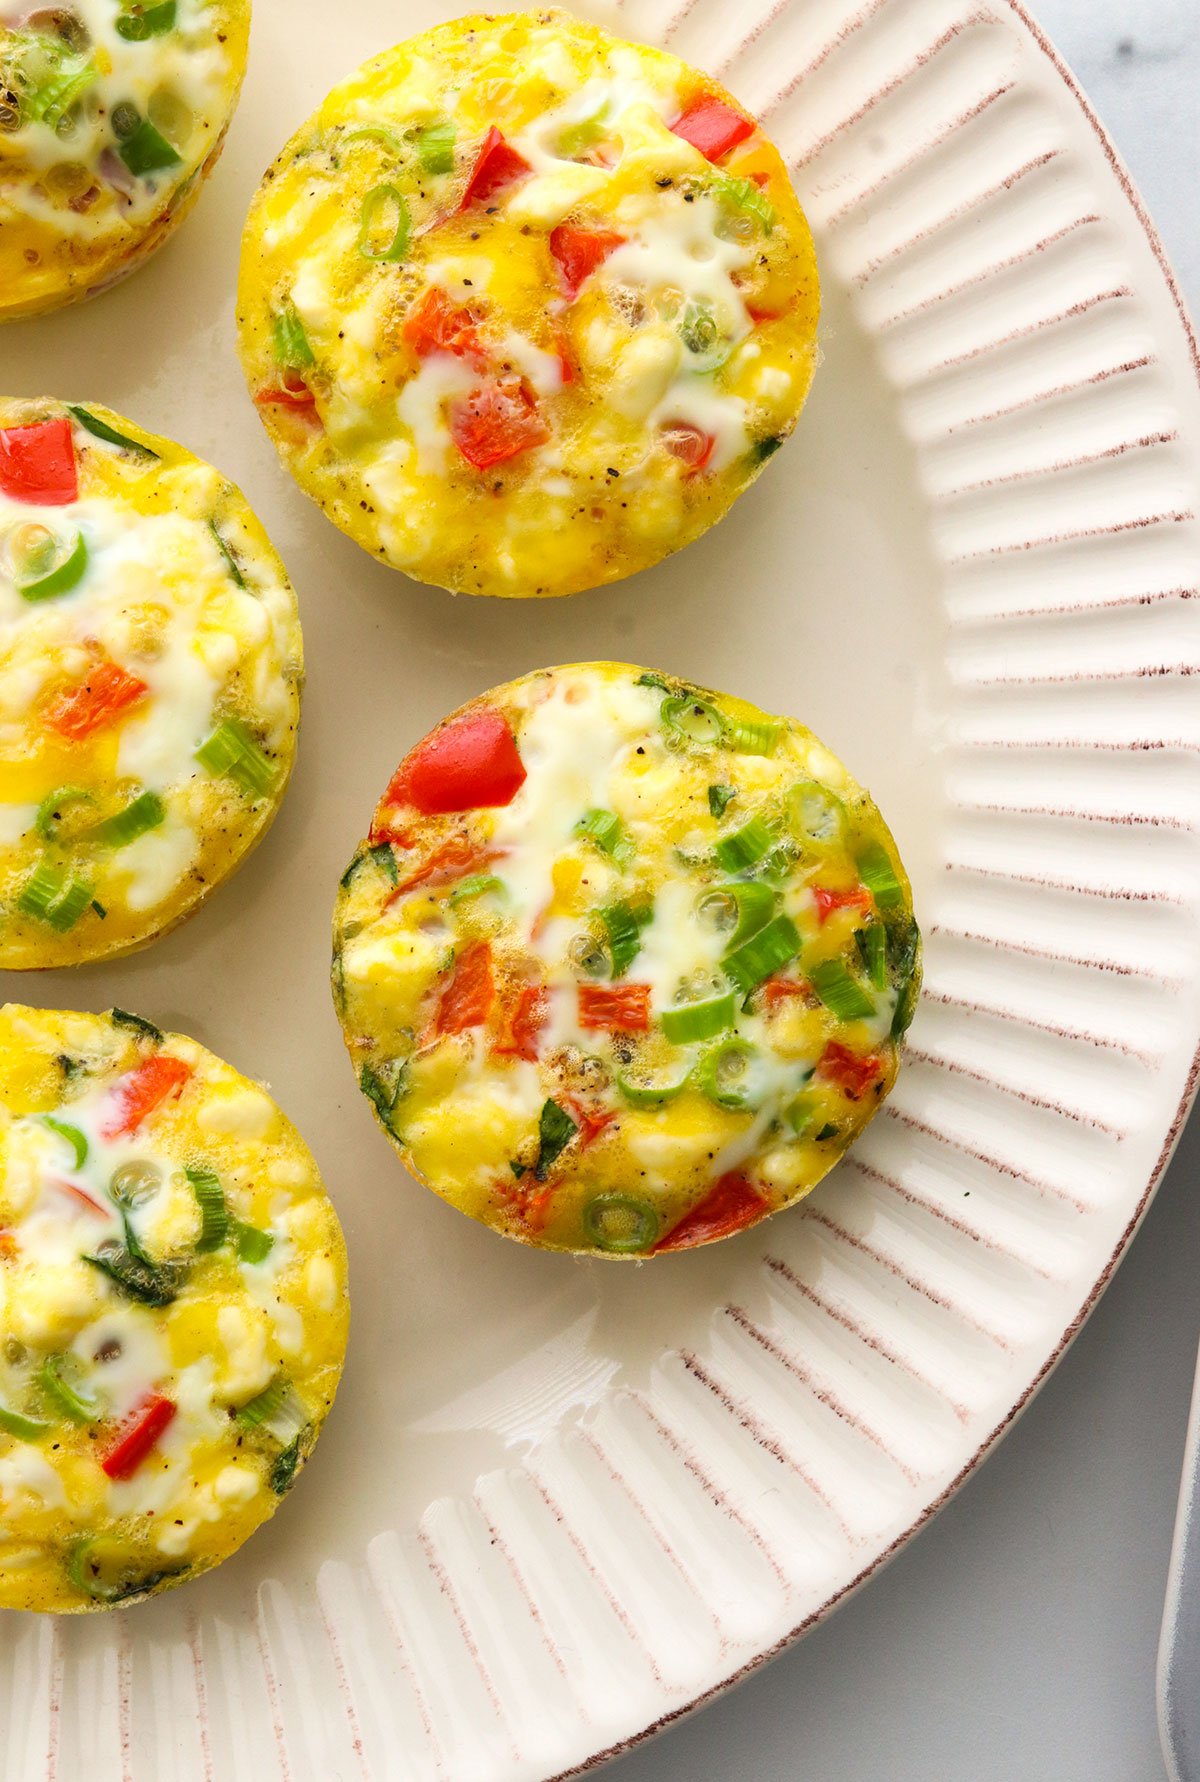 Egg muffins cooling on a white plate.